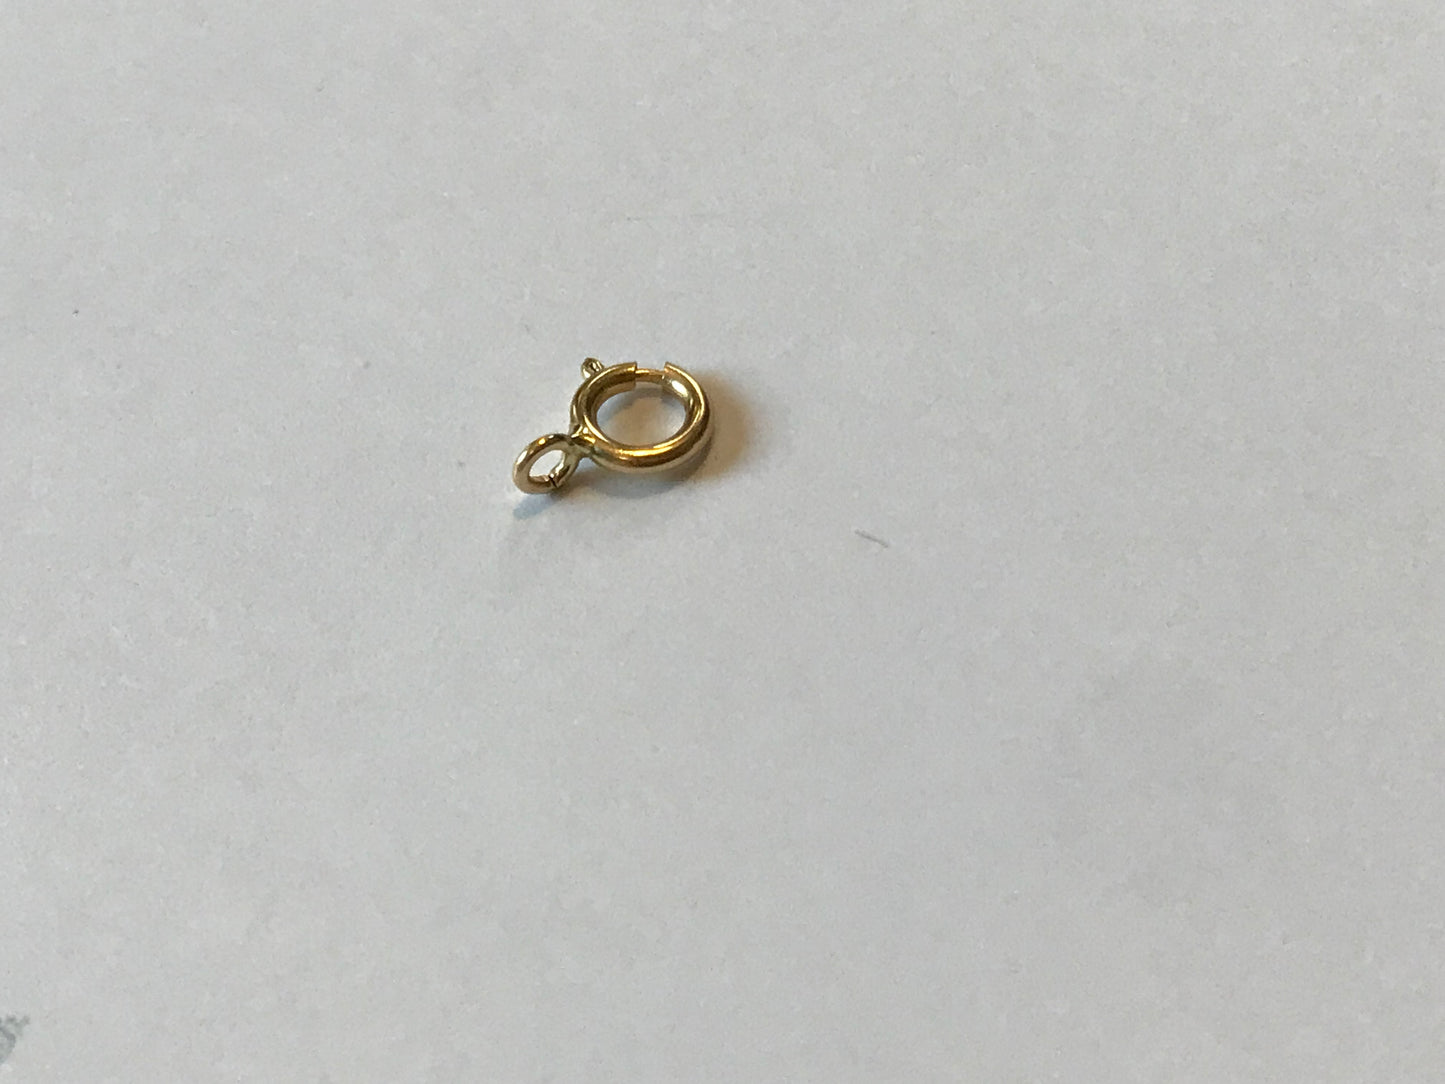 18 carat gold spring ring clasp, open or closed end ring